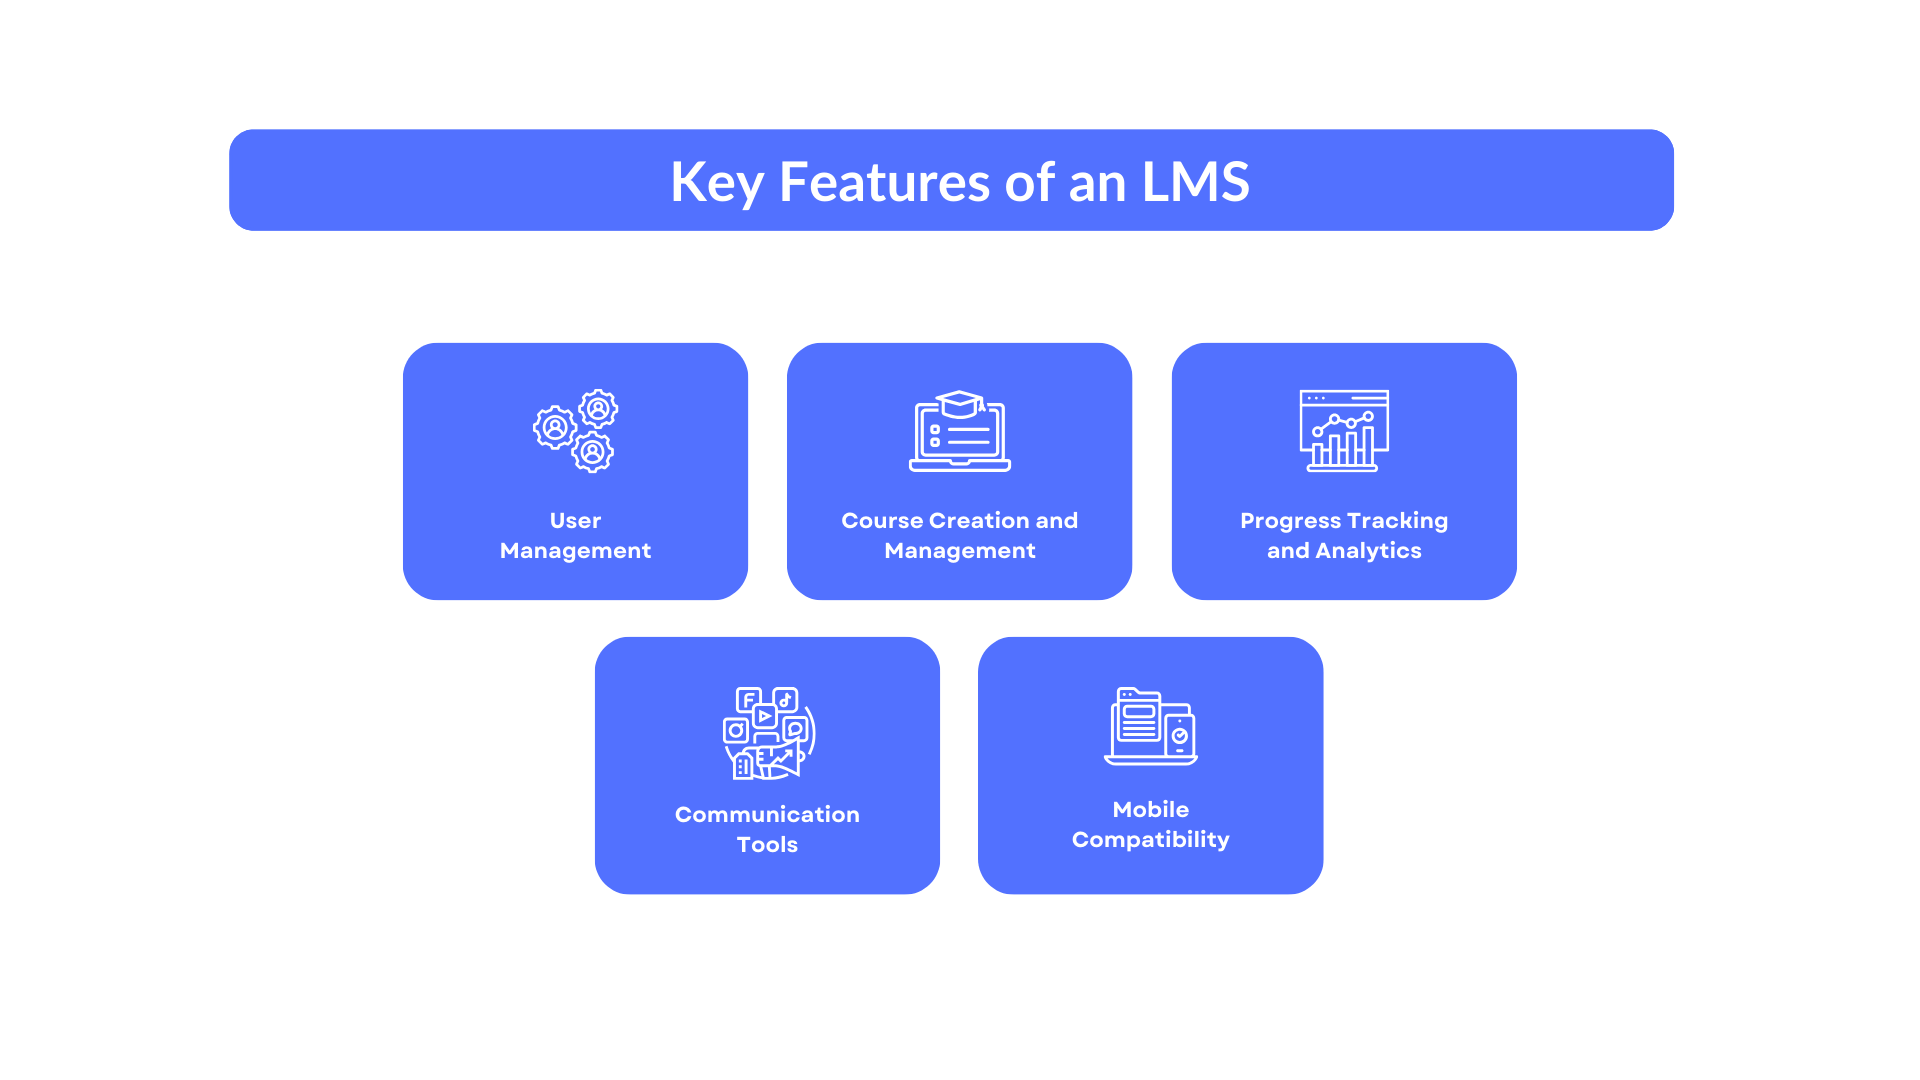 Key Features of an LMS